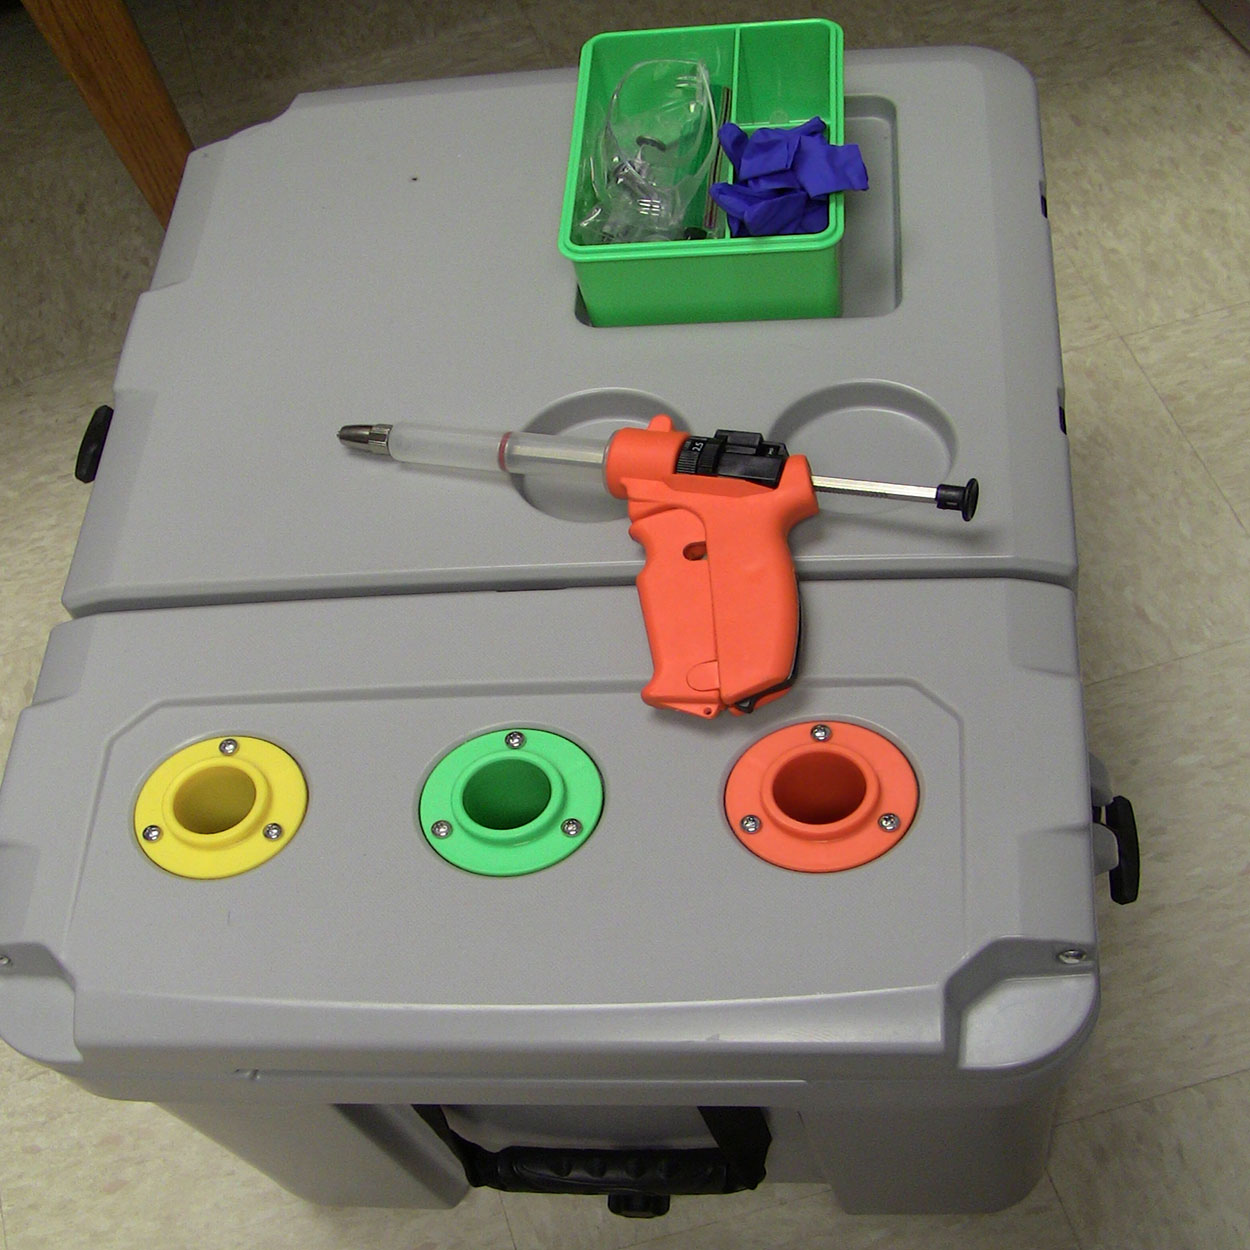 Heavy-duty cooler with color-coded slots for vaccines and a compartment for syringe and supplies.